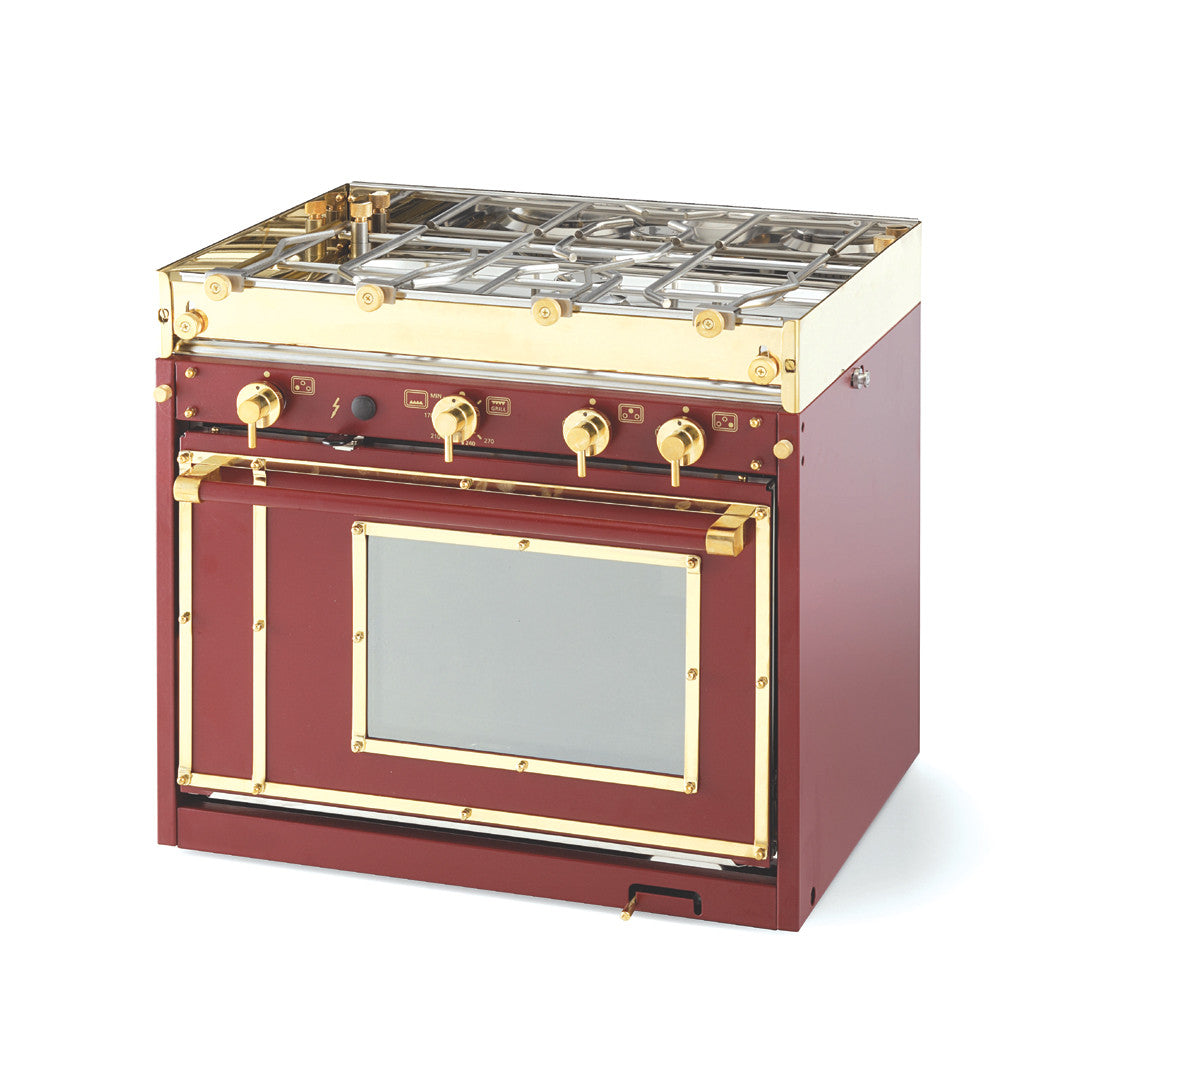 Royal - The Luxury cooker with oven for Classic Yachts